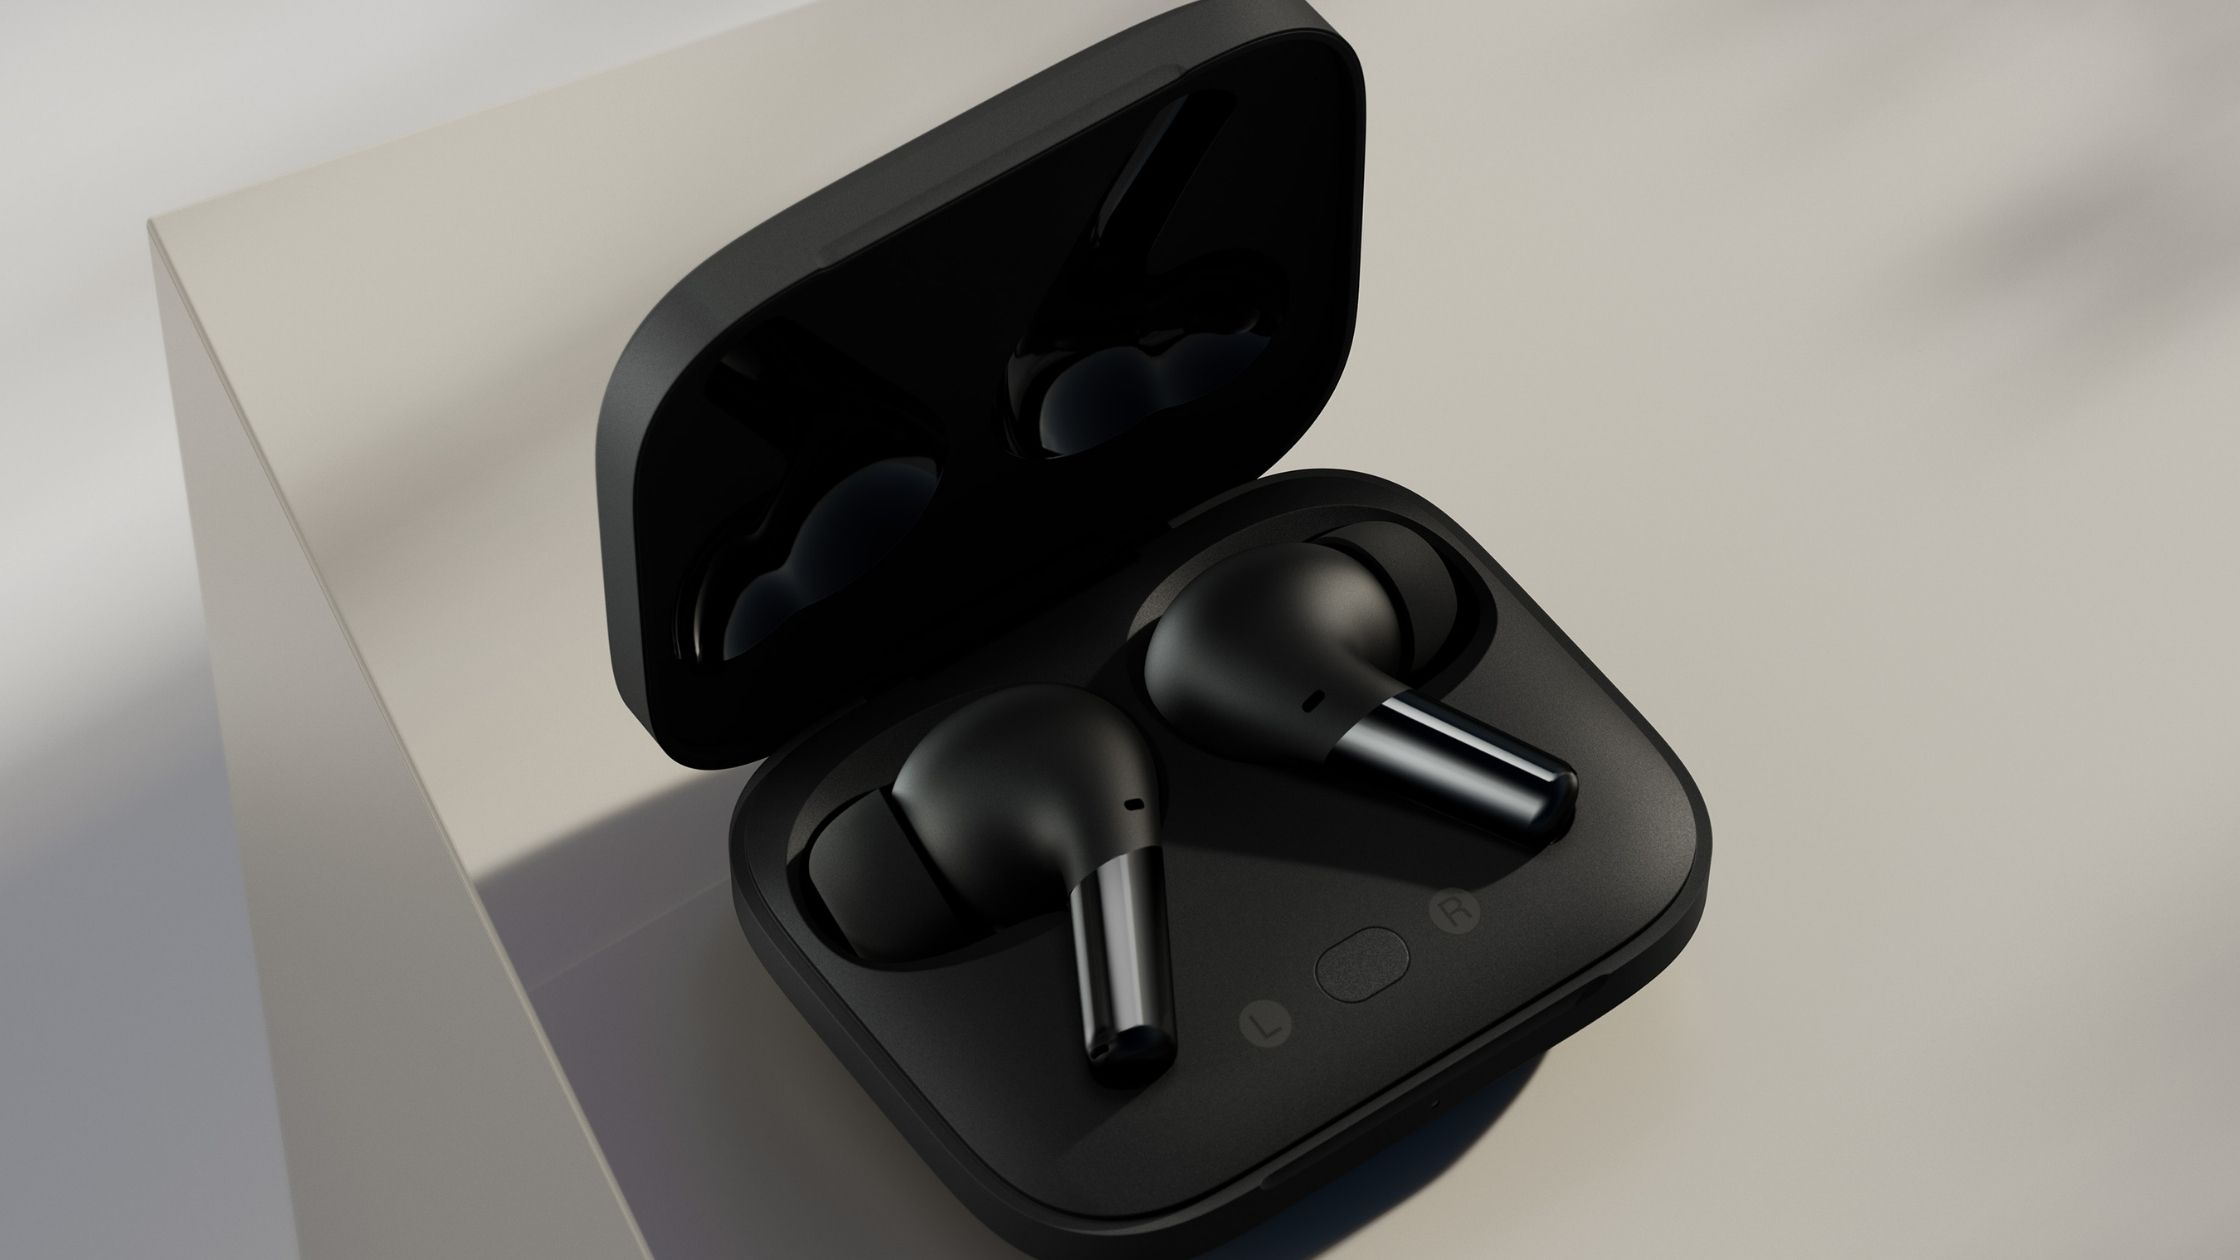 the OnePlus Buds Pro wireless earbuds in their charging case